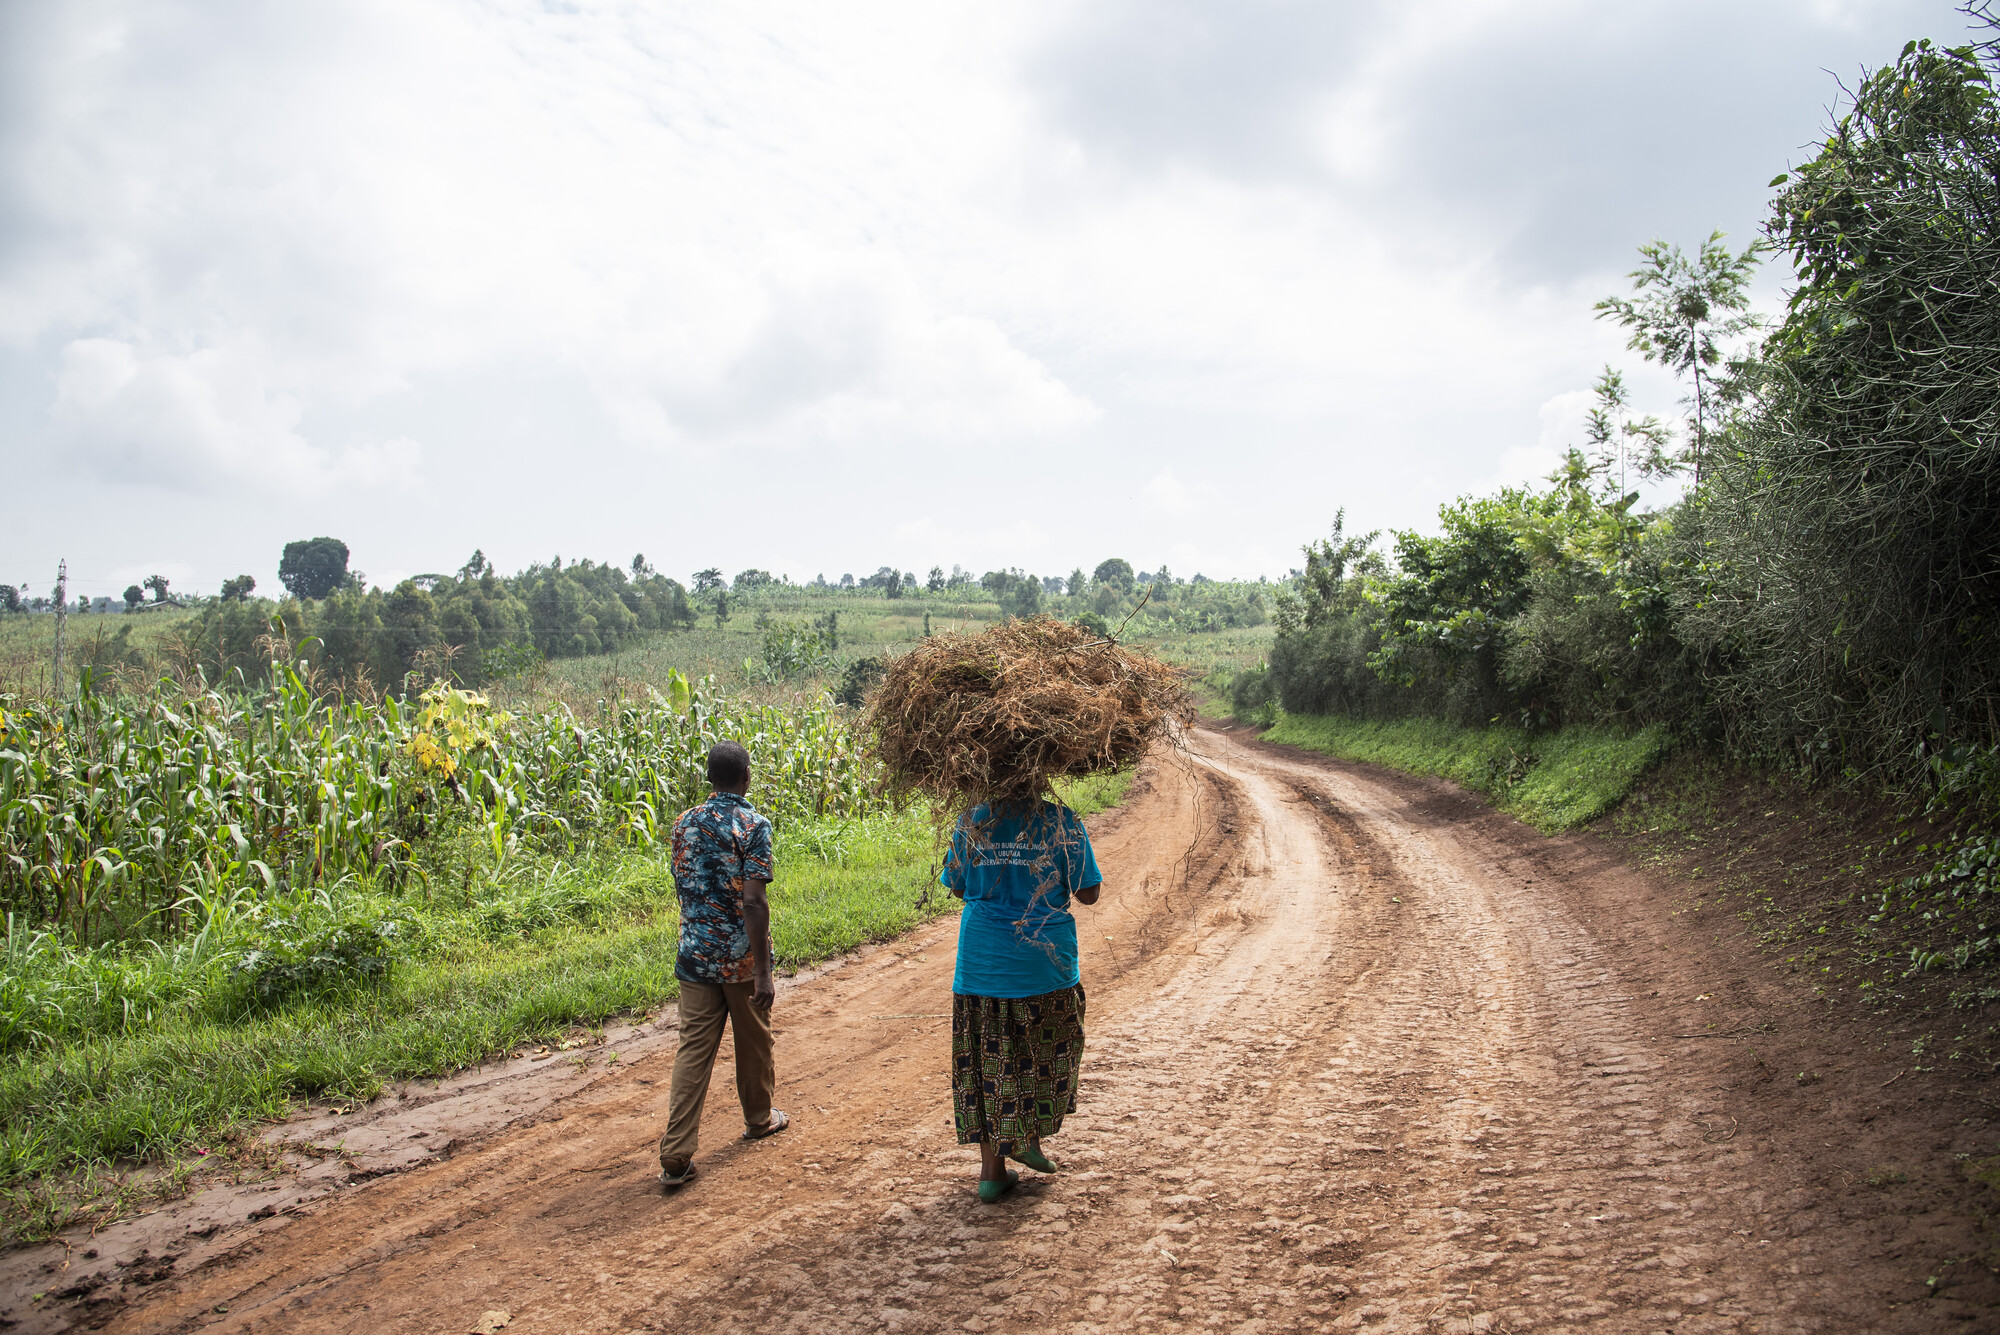 Two individuals walk on a dirt road amidst greenery. One carries a large bundle of hay on their head. The setting appears rural with overcast skies.